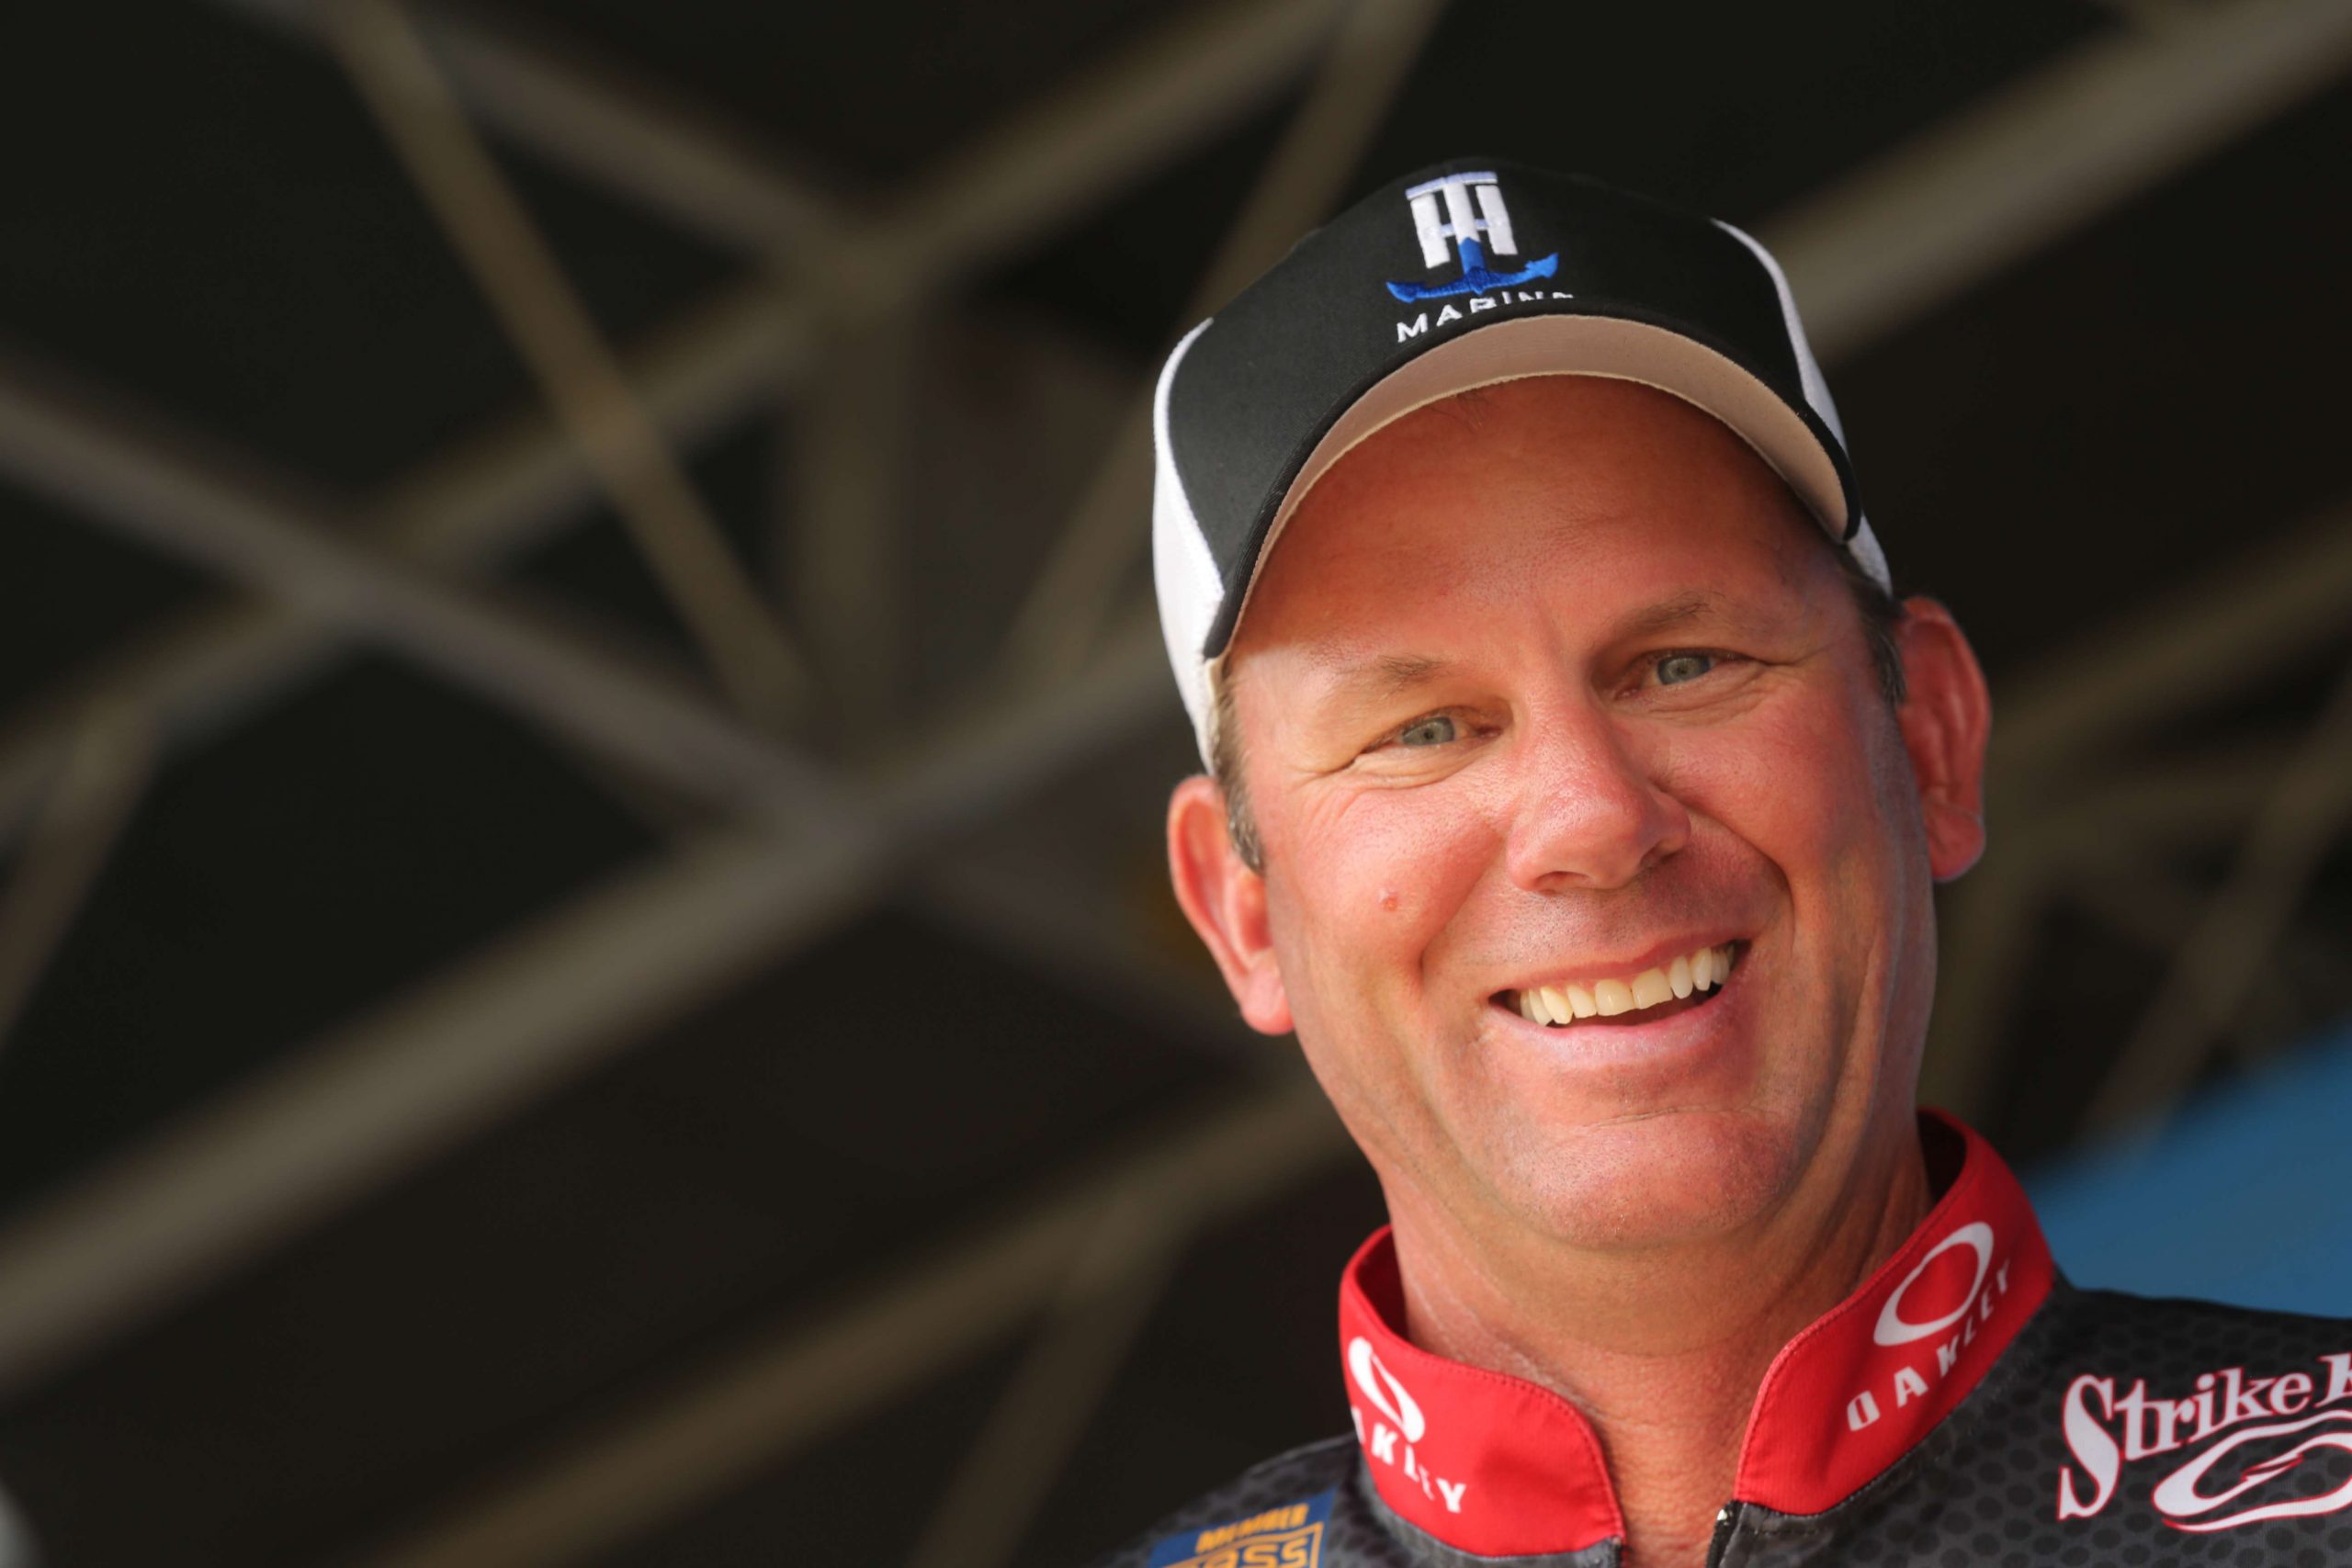 Kevin VanDam has given bass fishing fans plenty of reason to look at his career in absolute awe. Expect KVD to be around awhile longer.
